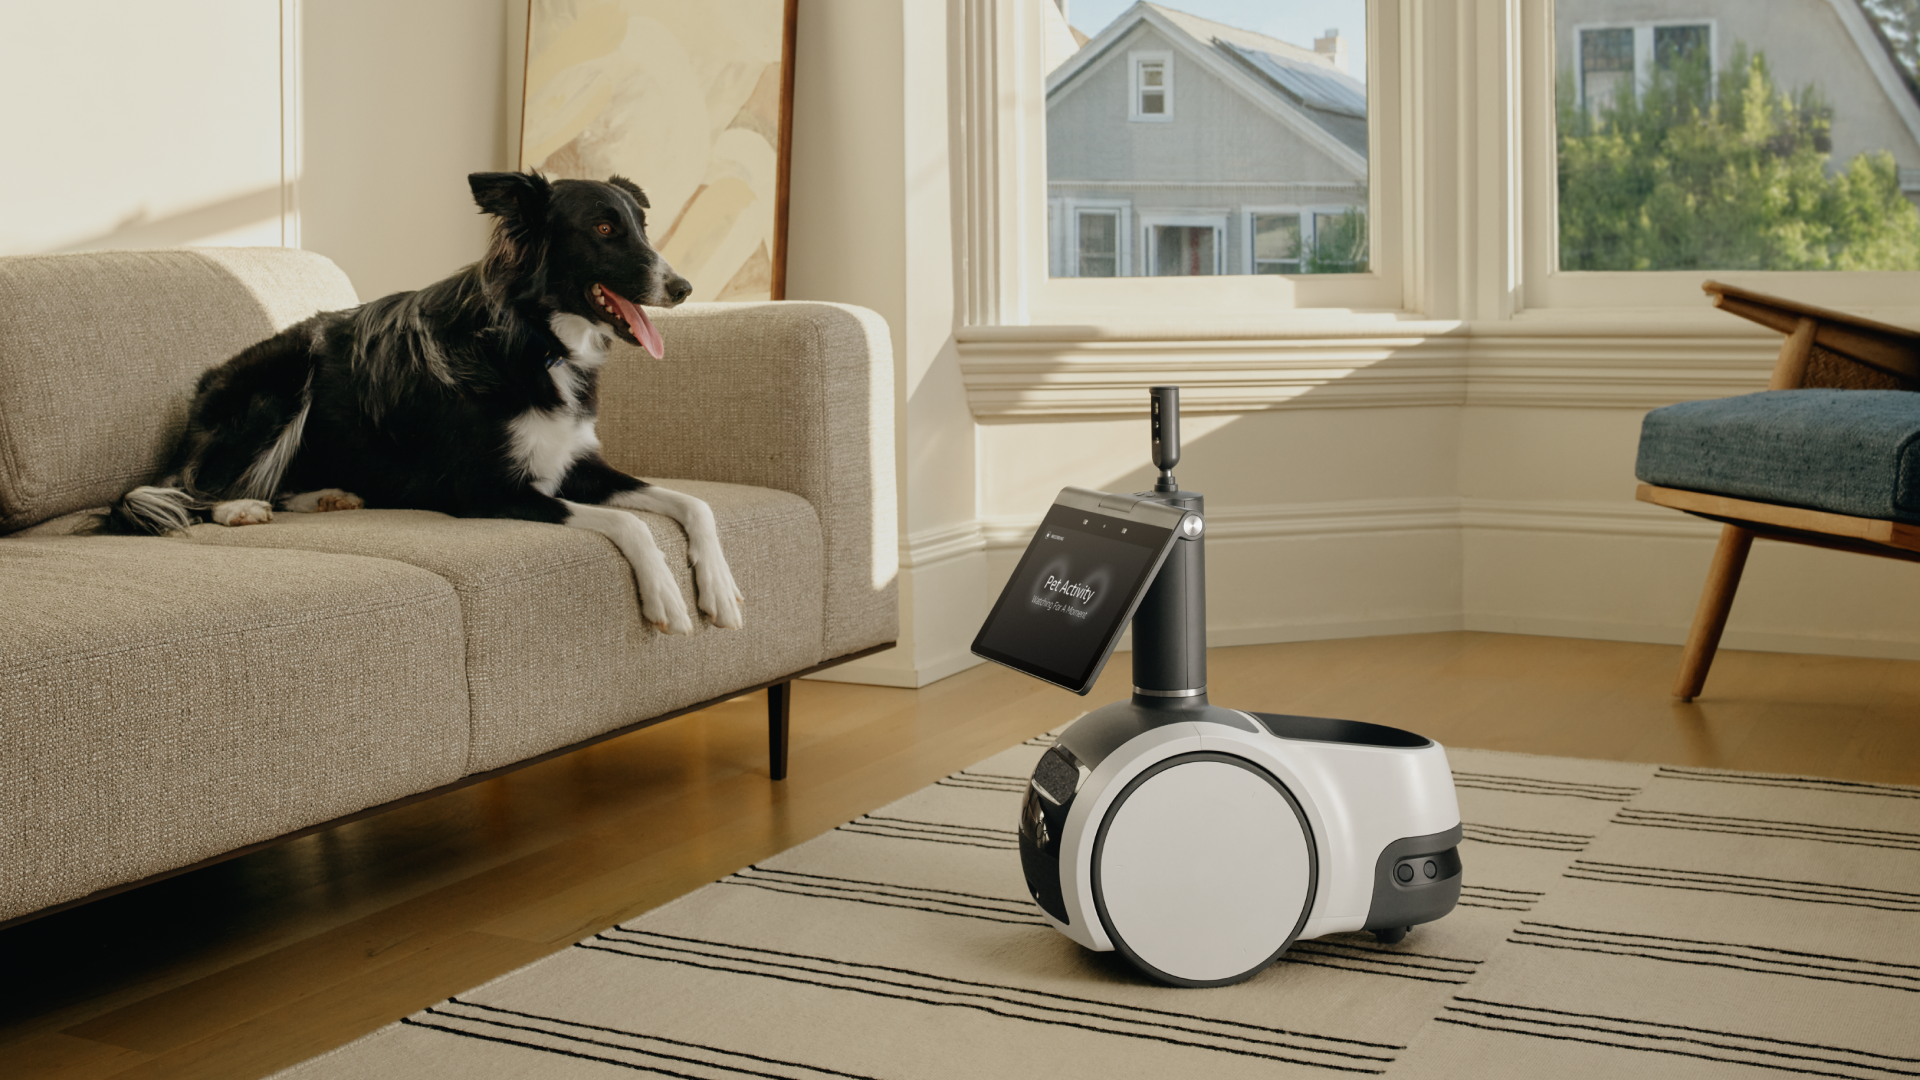 Amazon Astro detects a dog on couch